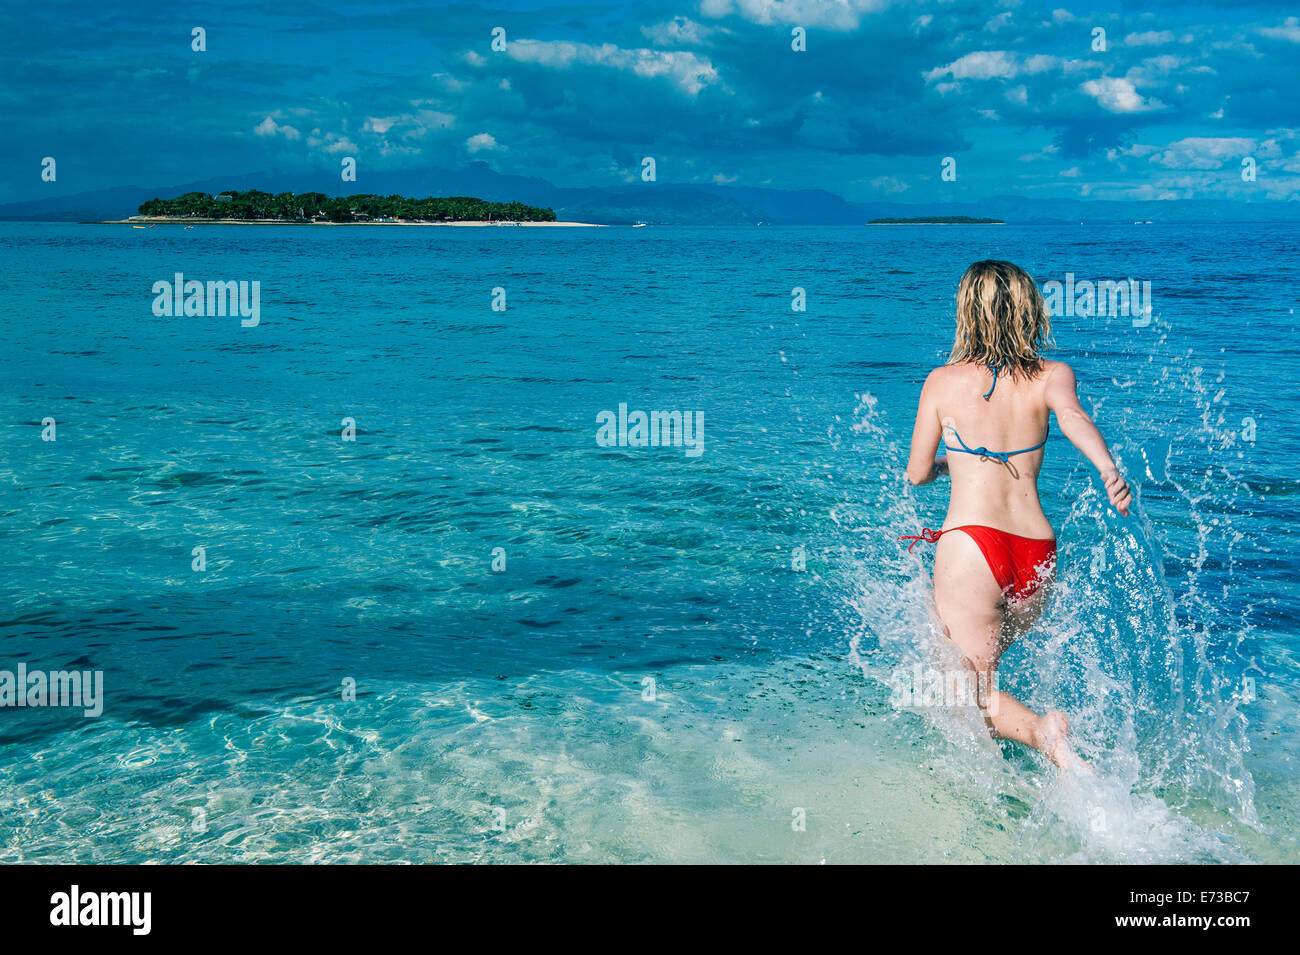 Woman running in the water, Beachcomber Island, Mamanucas Islands, Fiji, South Pacific, Pacific Stock Photo